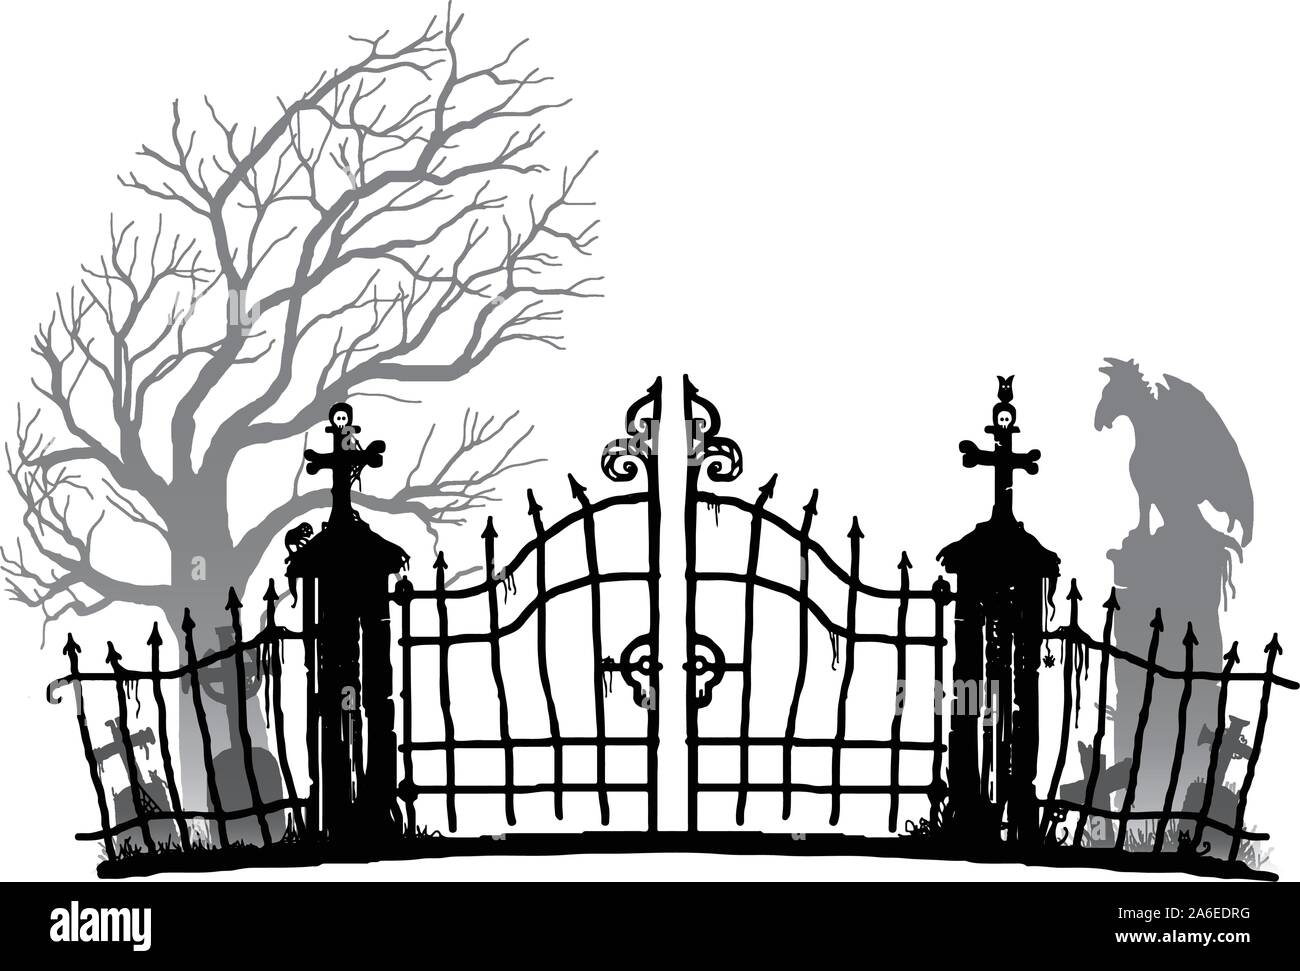 Cemetery Silhouette - black and gray tones Stock Vector